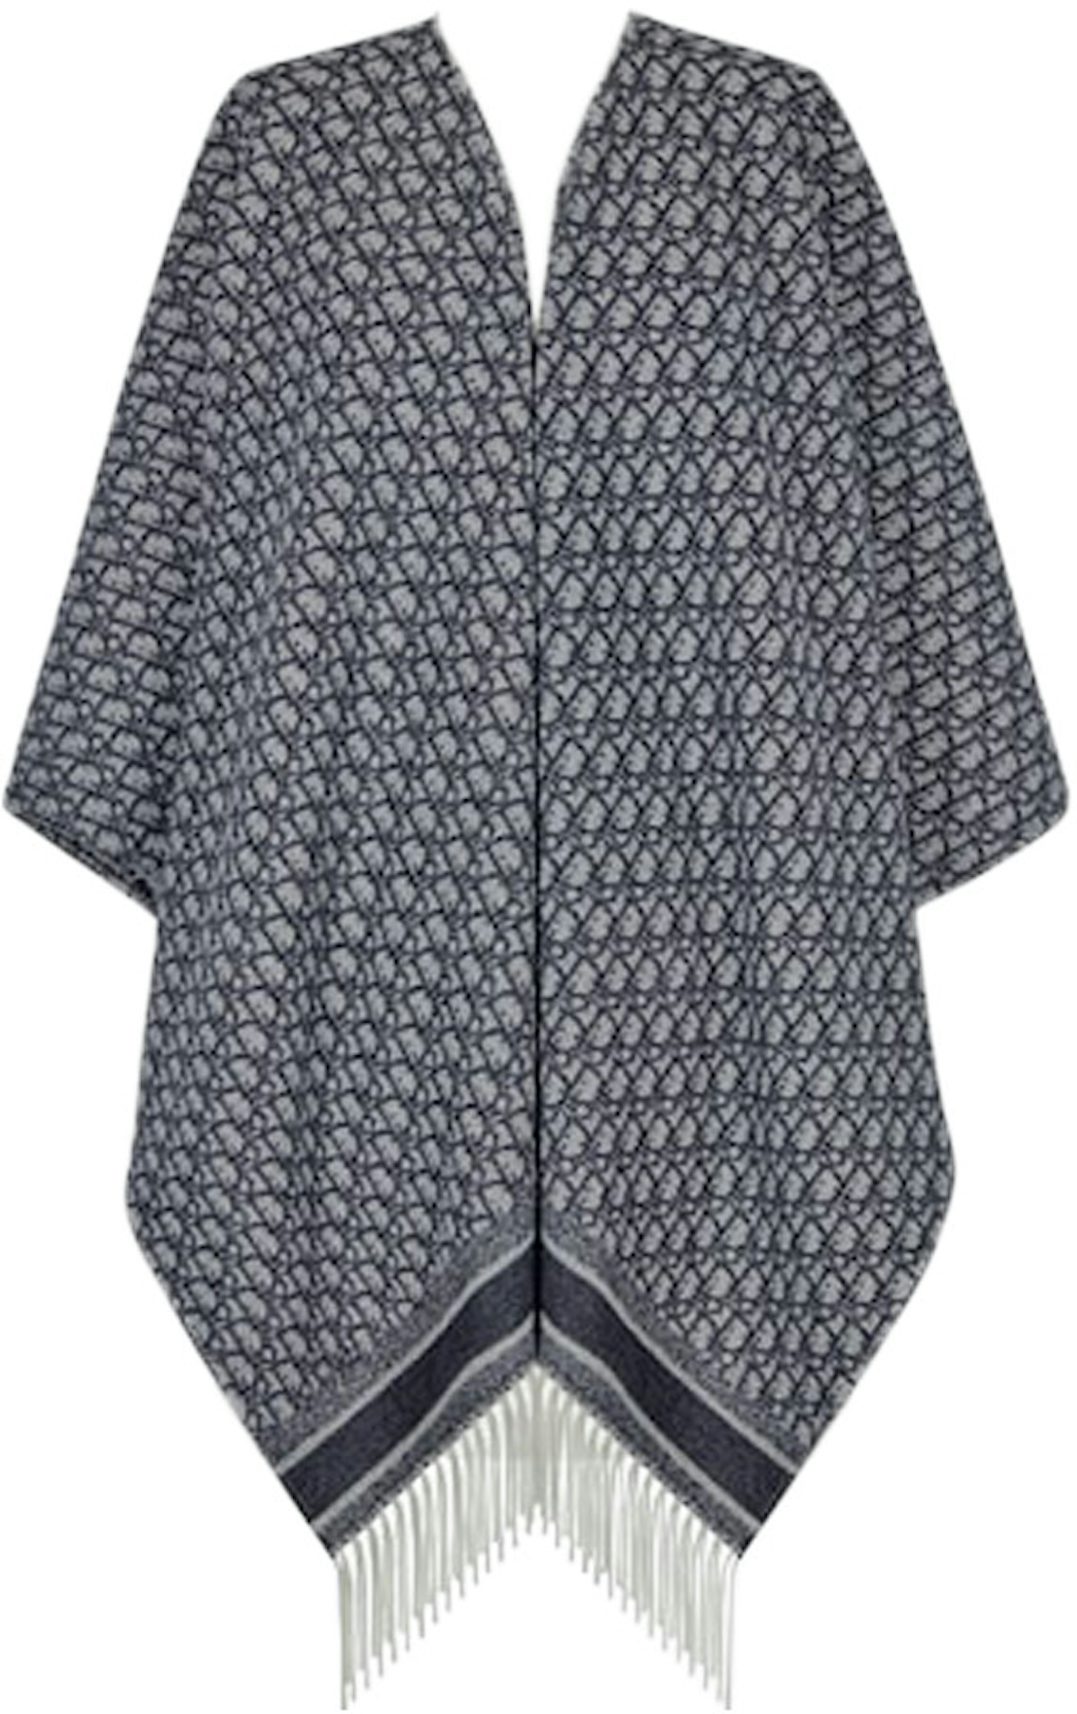 Dior Oblique Cardigan Beige and Brown Wool Jacquard